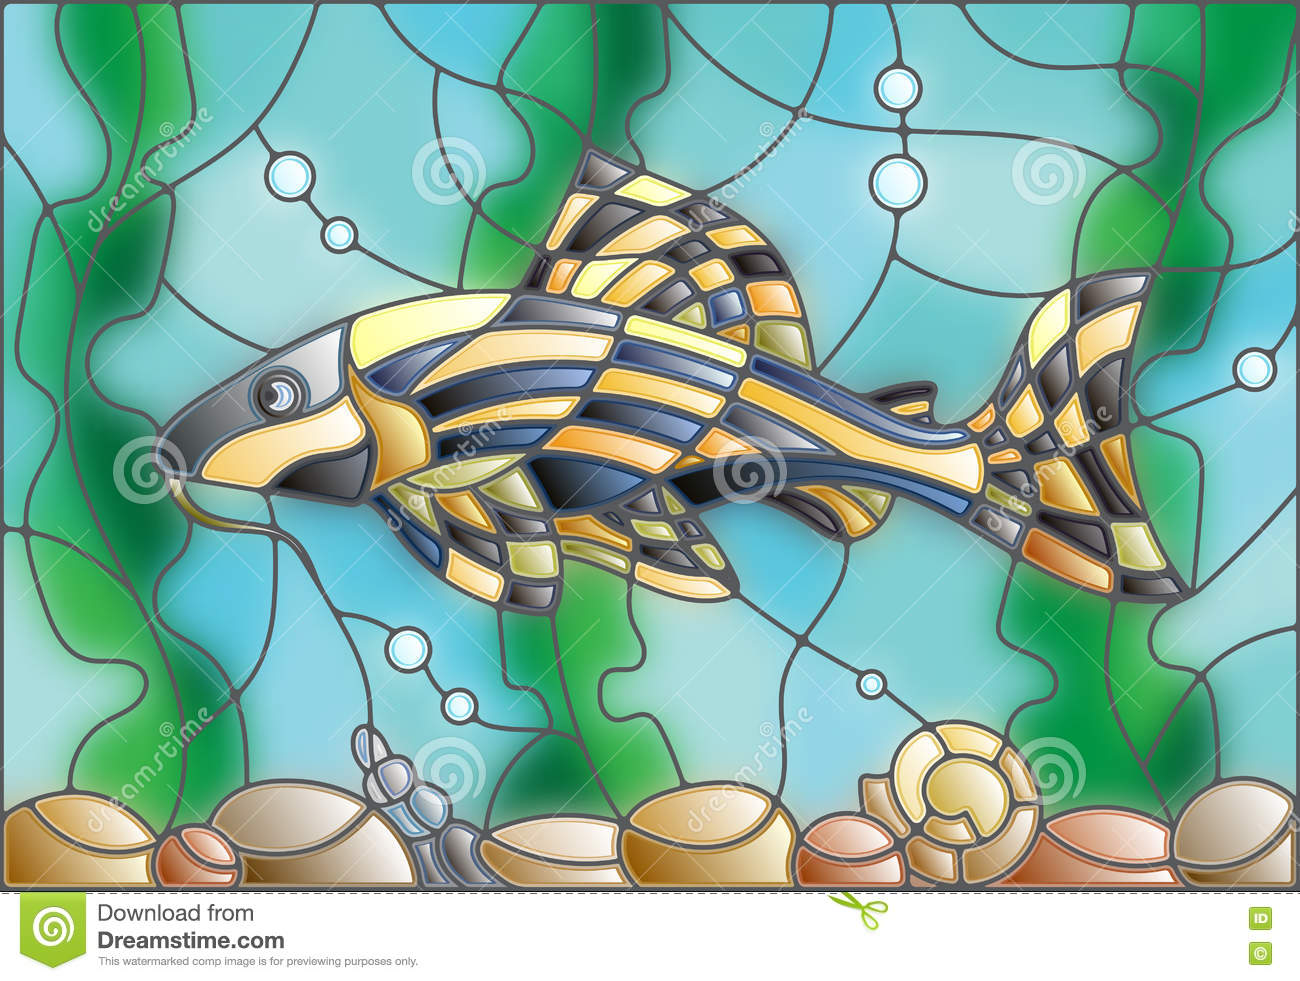 Stained Glass Illustration Of Aquarium Fish On The Background Of.